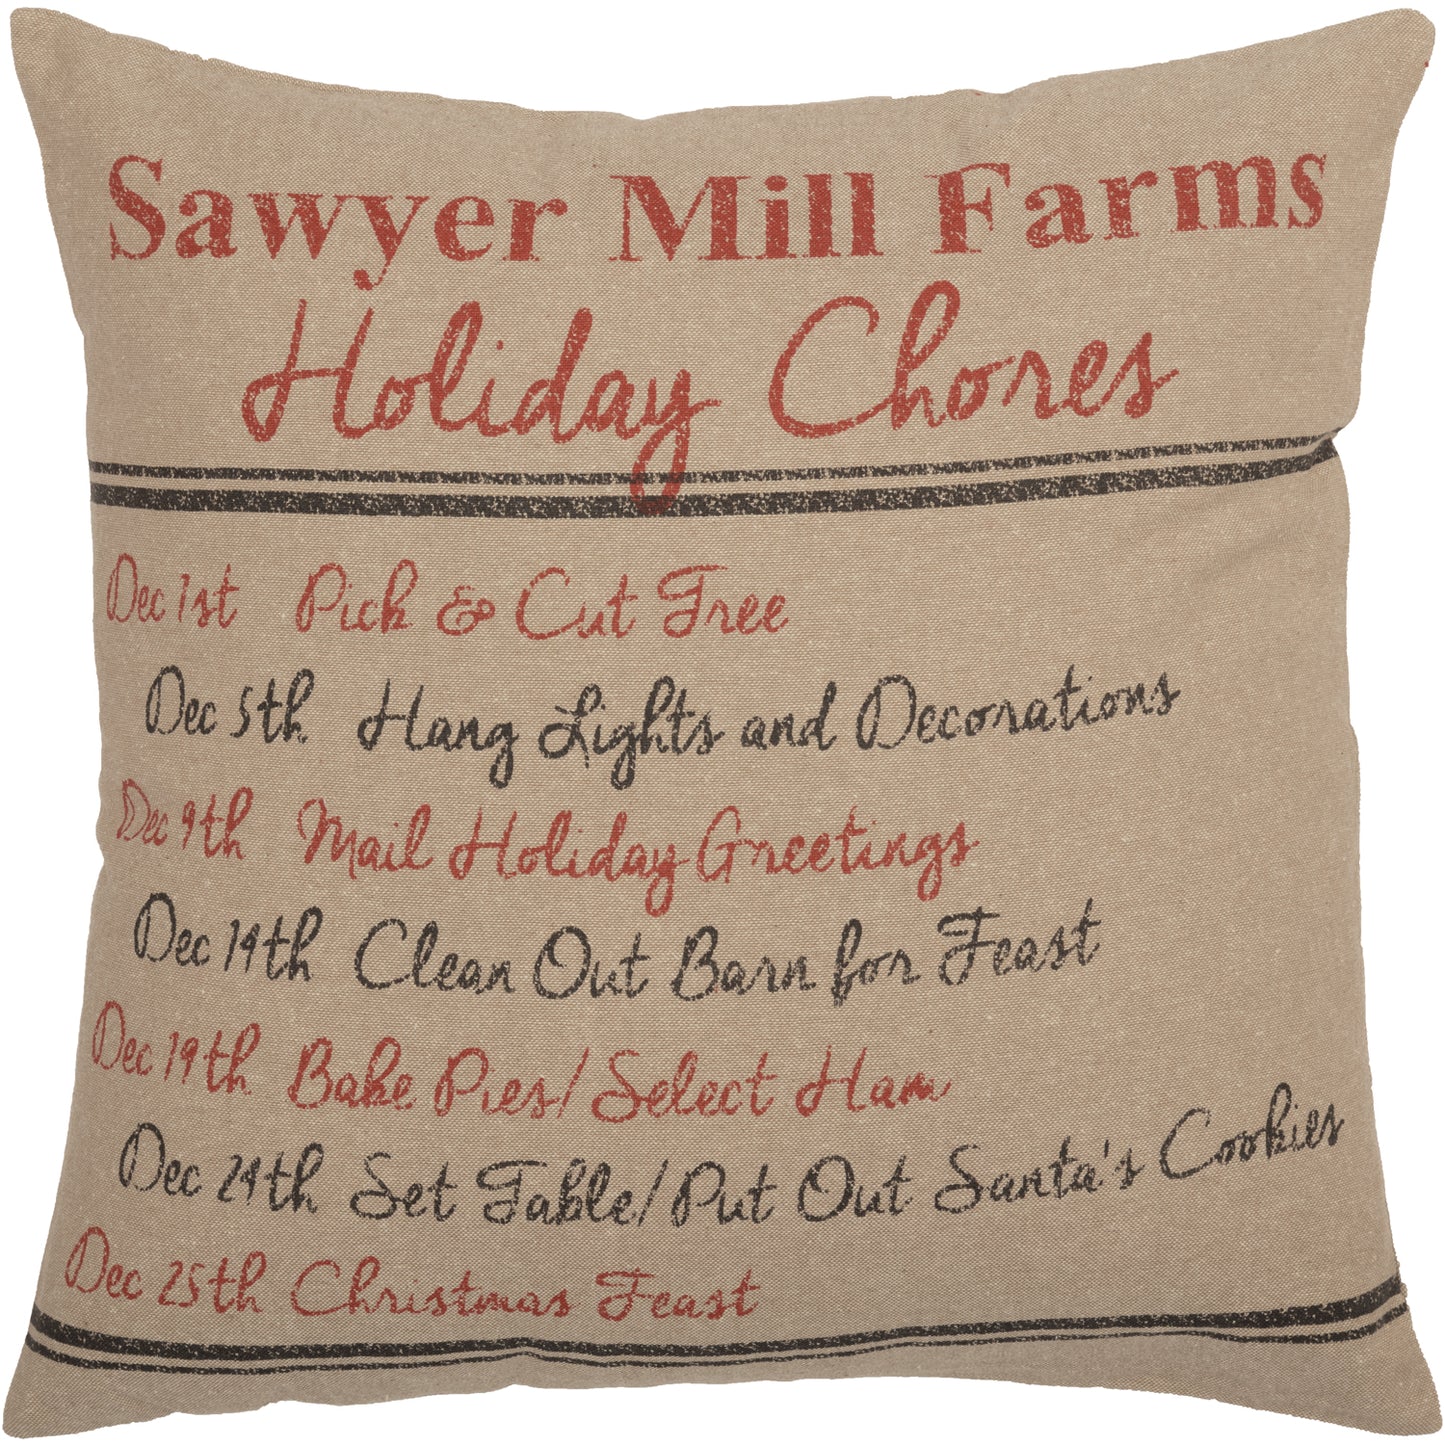 57362-Sawyer-Mill-Holiday-Chores-Pillow-18x18-image-2